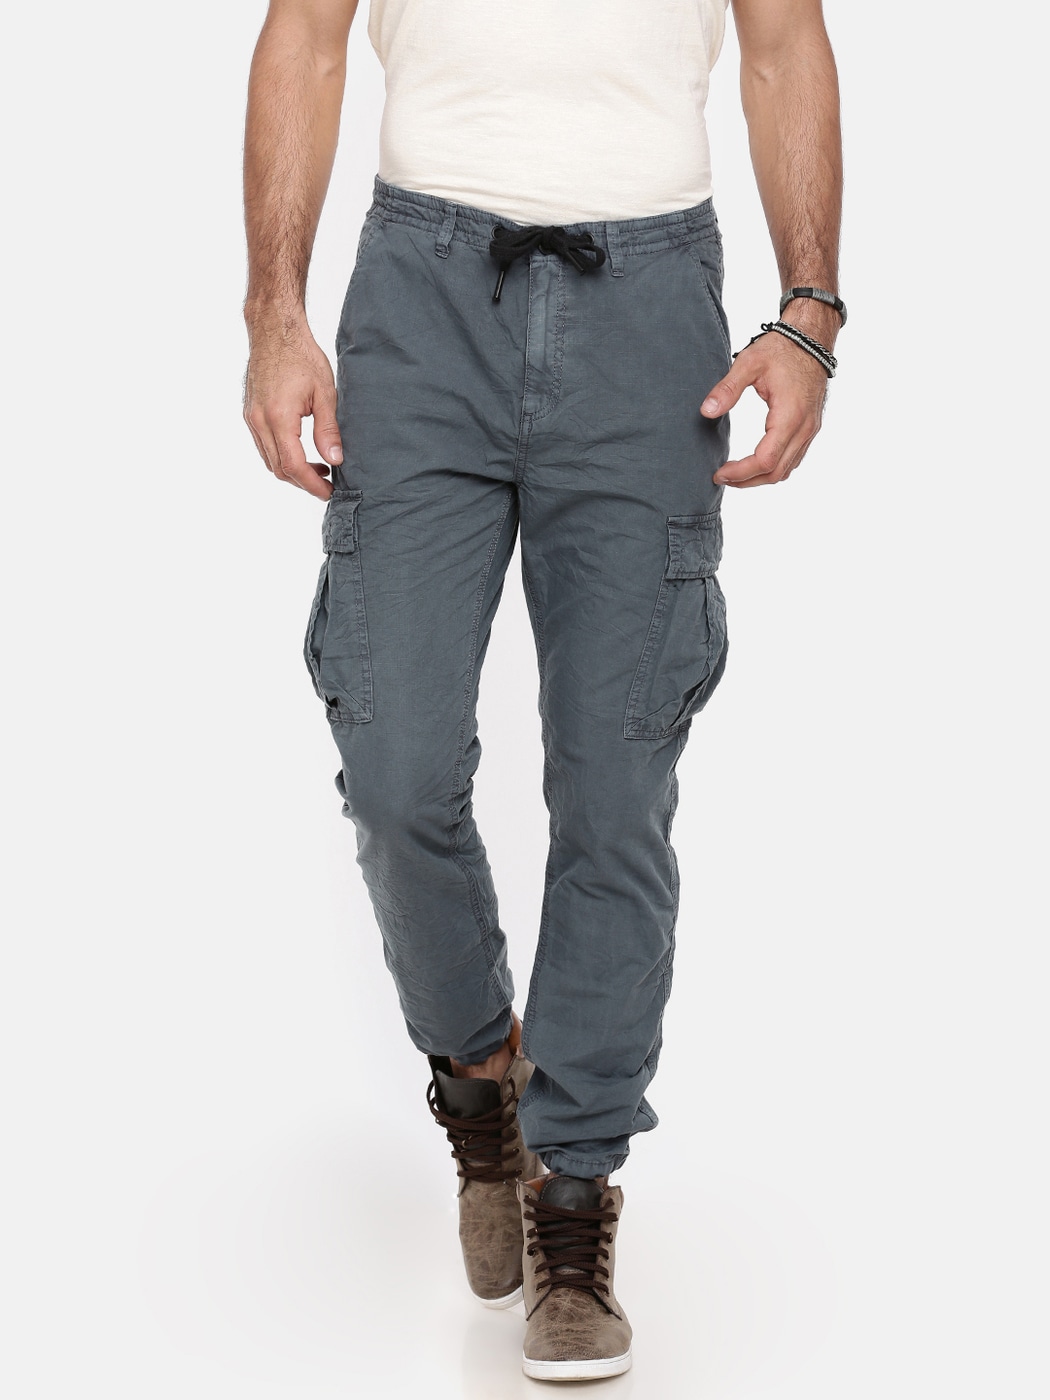 Mens Casual Trousers Buy Joggers Cargos  Chinos for Men Online in India   Looksgudin